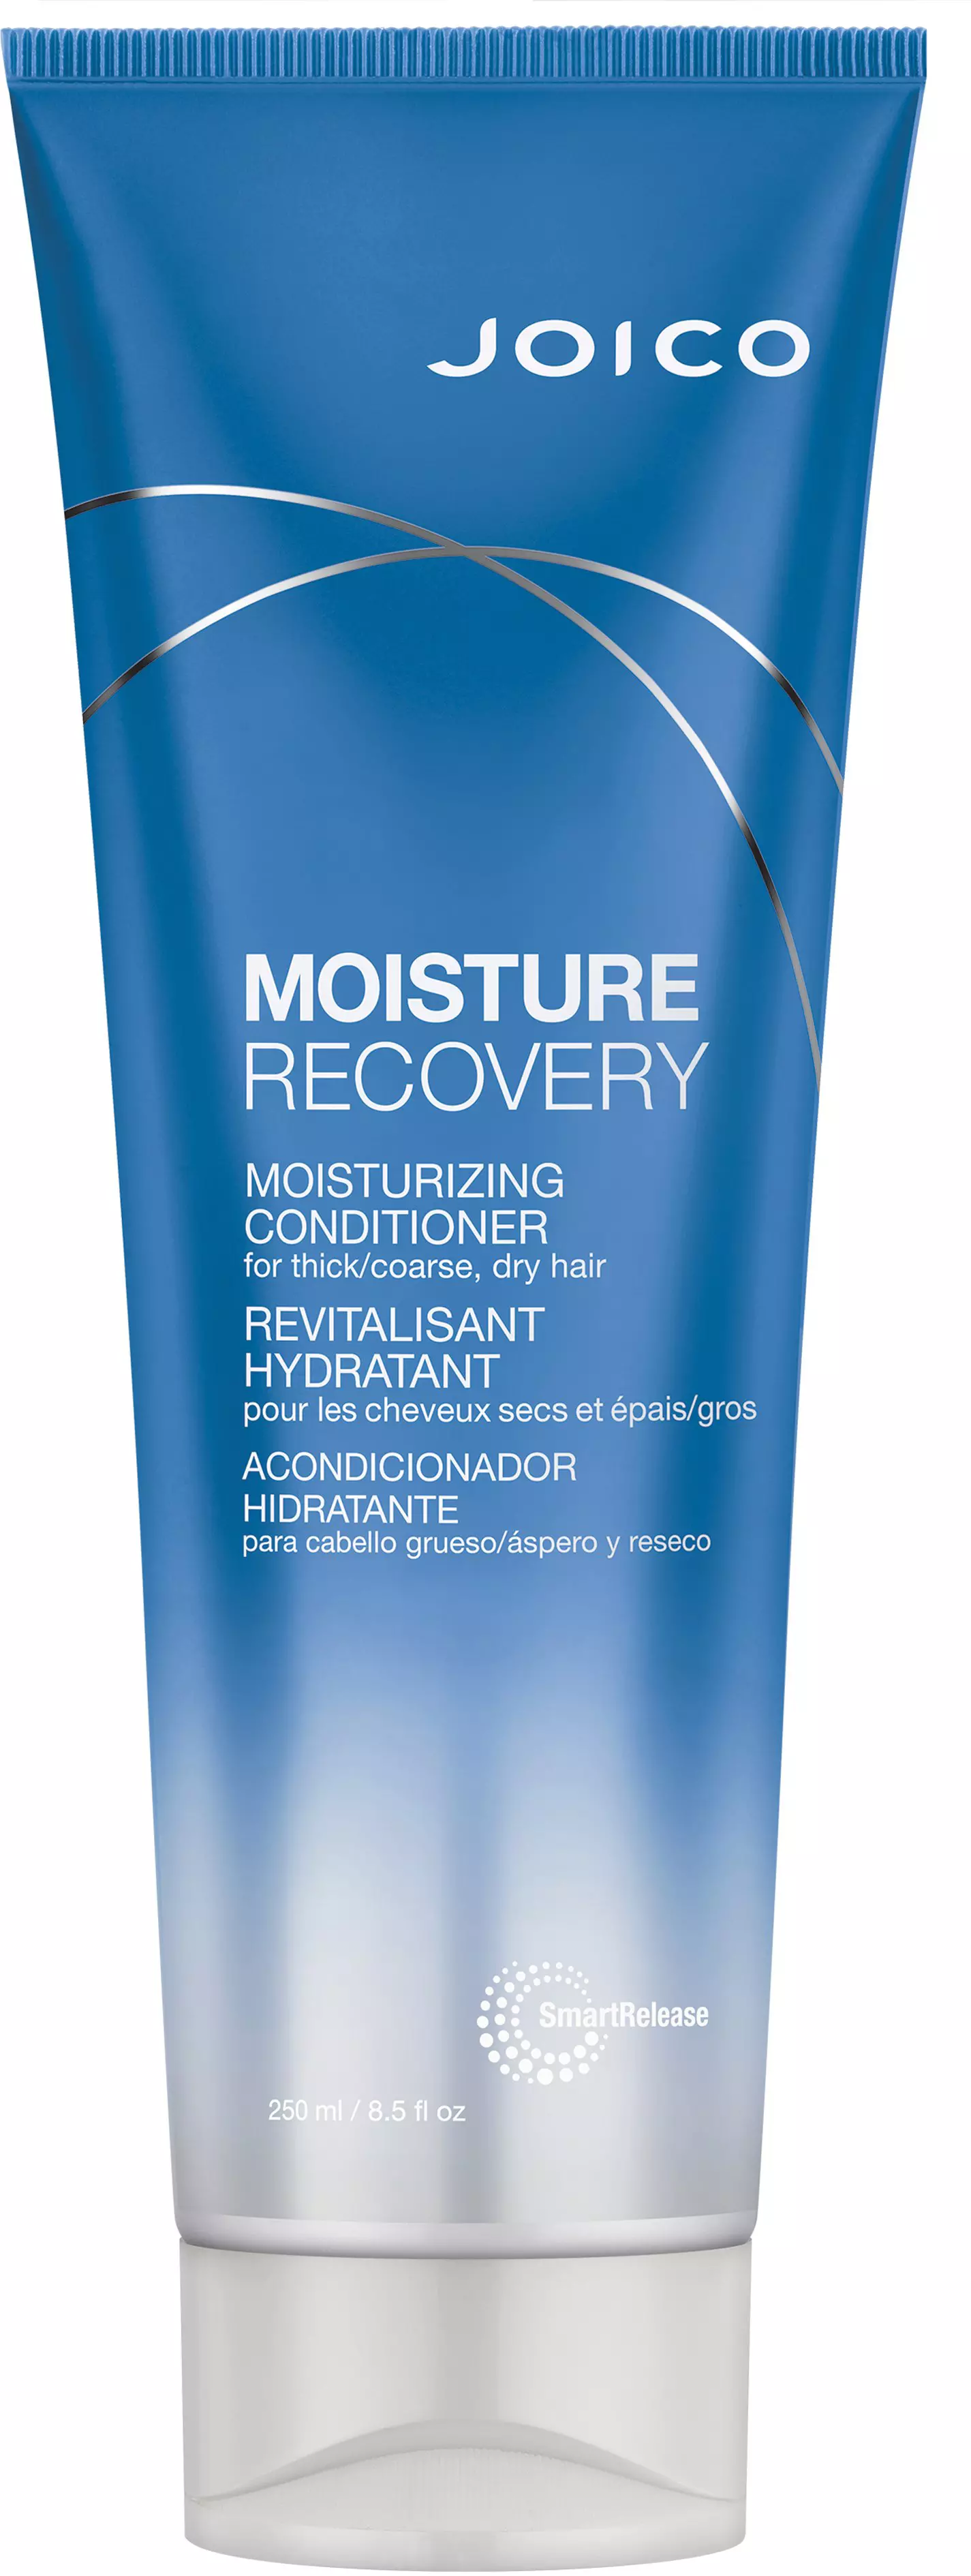 Joico Moisture Recovery Conditioner Ml